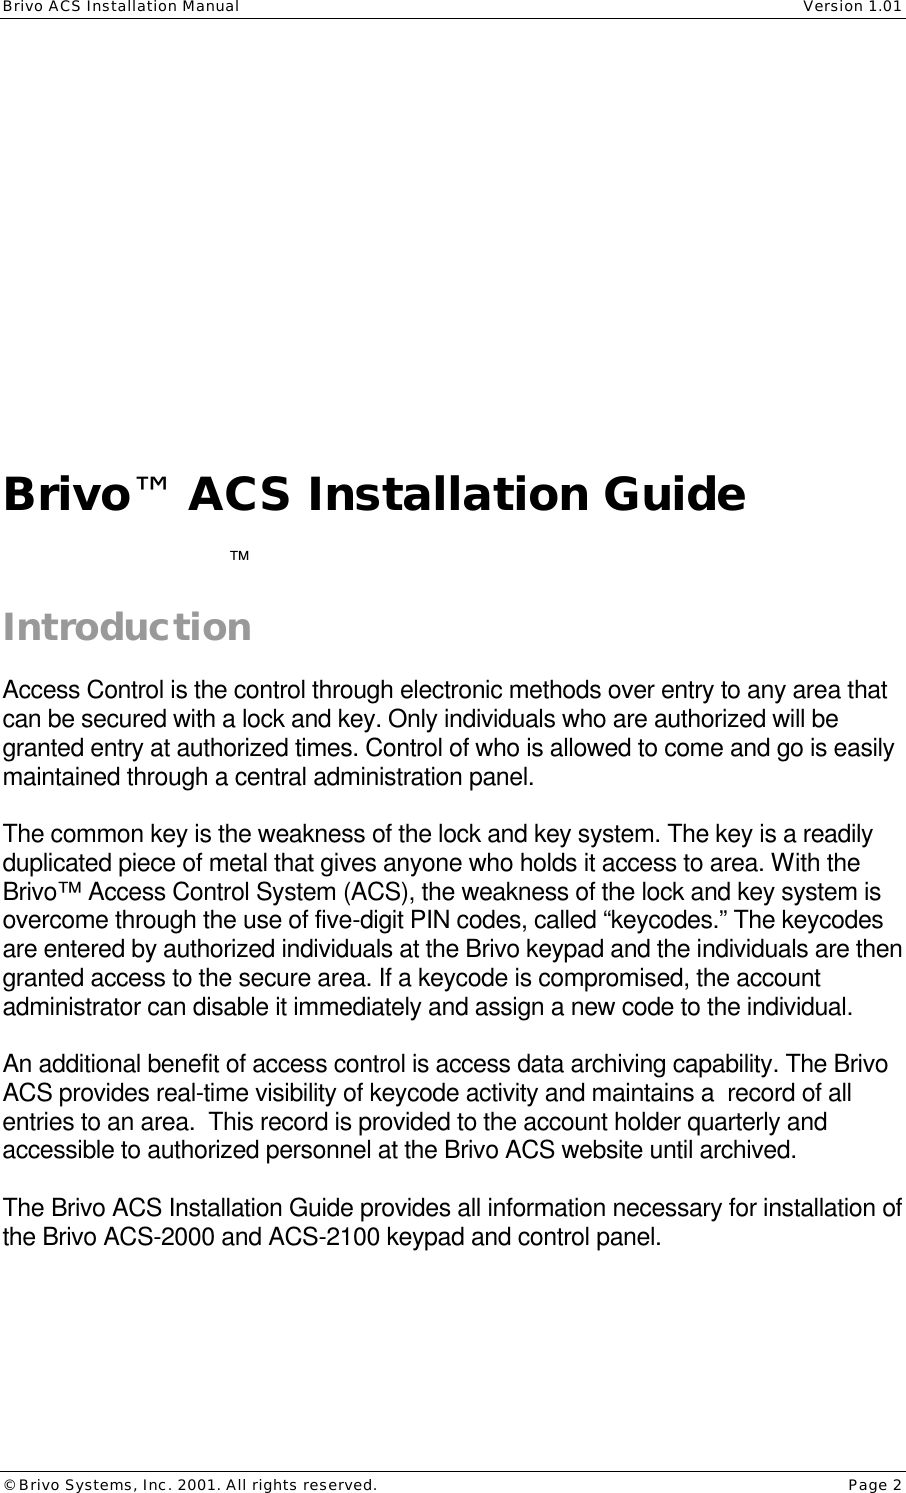 Brivo ACS Installation Manual    Version 1.01 © Brivo Systems, Inc. 2001. All rights reserved.    Page 2             Brivo™ ACS Installation Guide   Introduction  Access Control is the control through electronic methods over entry to any area that can be secured with a lock and key. Only individuals who are authorized will be granted entry at authorized times. Control of who is allowed to come and go is easily maintained through a central administration panel.  The common key is the weakness of the lock and key system. The key is a readily duplicated piece of metal that gives anyone who holds it access to area. With the Brivo™ Access Control System (ACS), the weakness of the lock and key system is overcome through the use of five-digit PIN codes, called “keycodes.” The keycodes are entered by authorized individuals at the Brivo keypad and the individuals are then granted access to the secure area. If a keycode is compromised, the account administrator can disable it immediately and assign a new code to the individual.  An additional benefit of access control is access data archiving capability. The Brivo ACS provides real-time visibility of keycode activity and maintains a  record of all entries to an area.  This record is provided to the account holder quarterly and accessible to authorized personnel at the Brivo ACS website until archived.  The Brivo ACS Installation Guide provides all information necessary for installation of the Brivo ACS-2000 and ACS-2100 keypad and control panel.  ™   